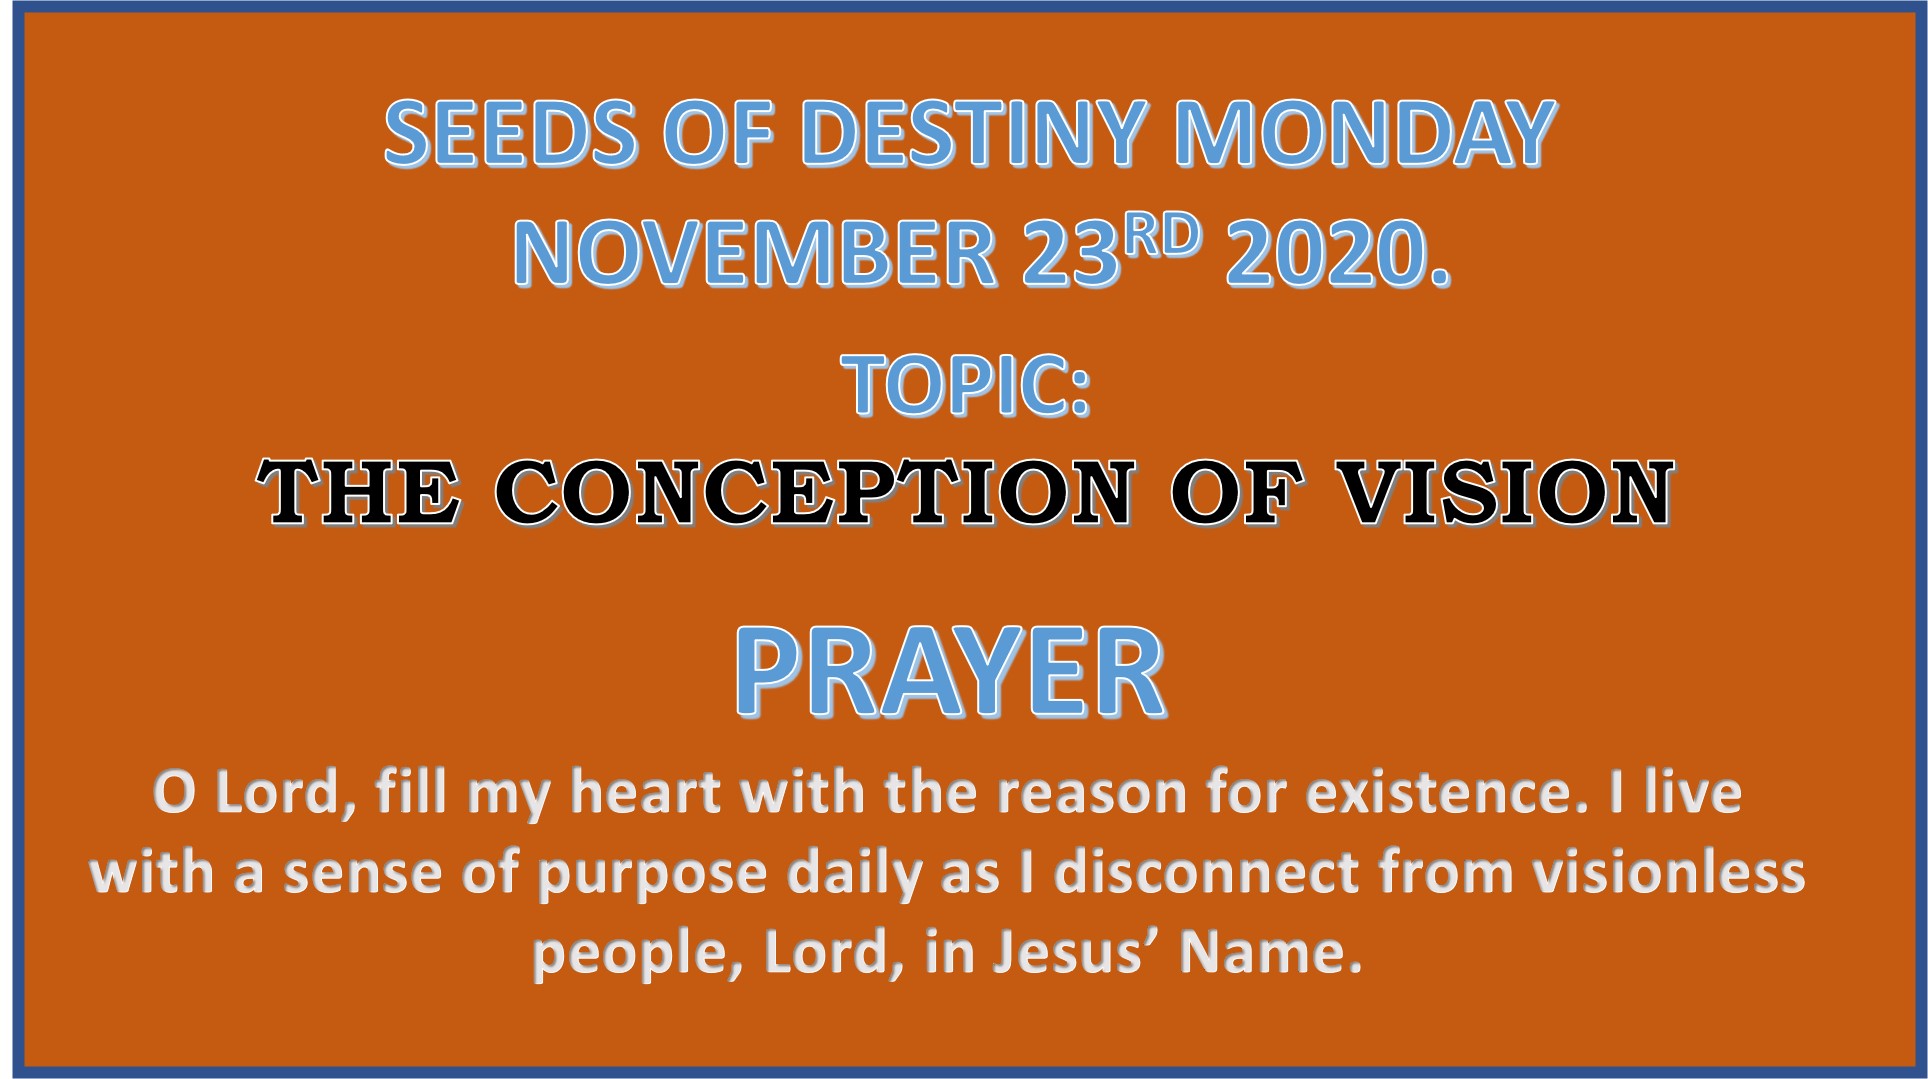 Seeds of Destiny Monday 23rd November 2020 by Dr Paul Enenche